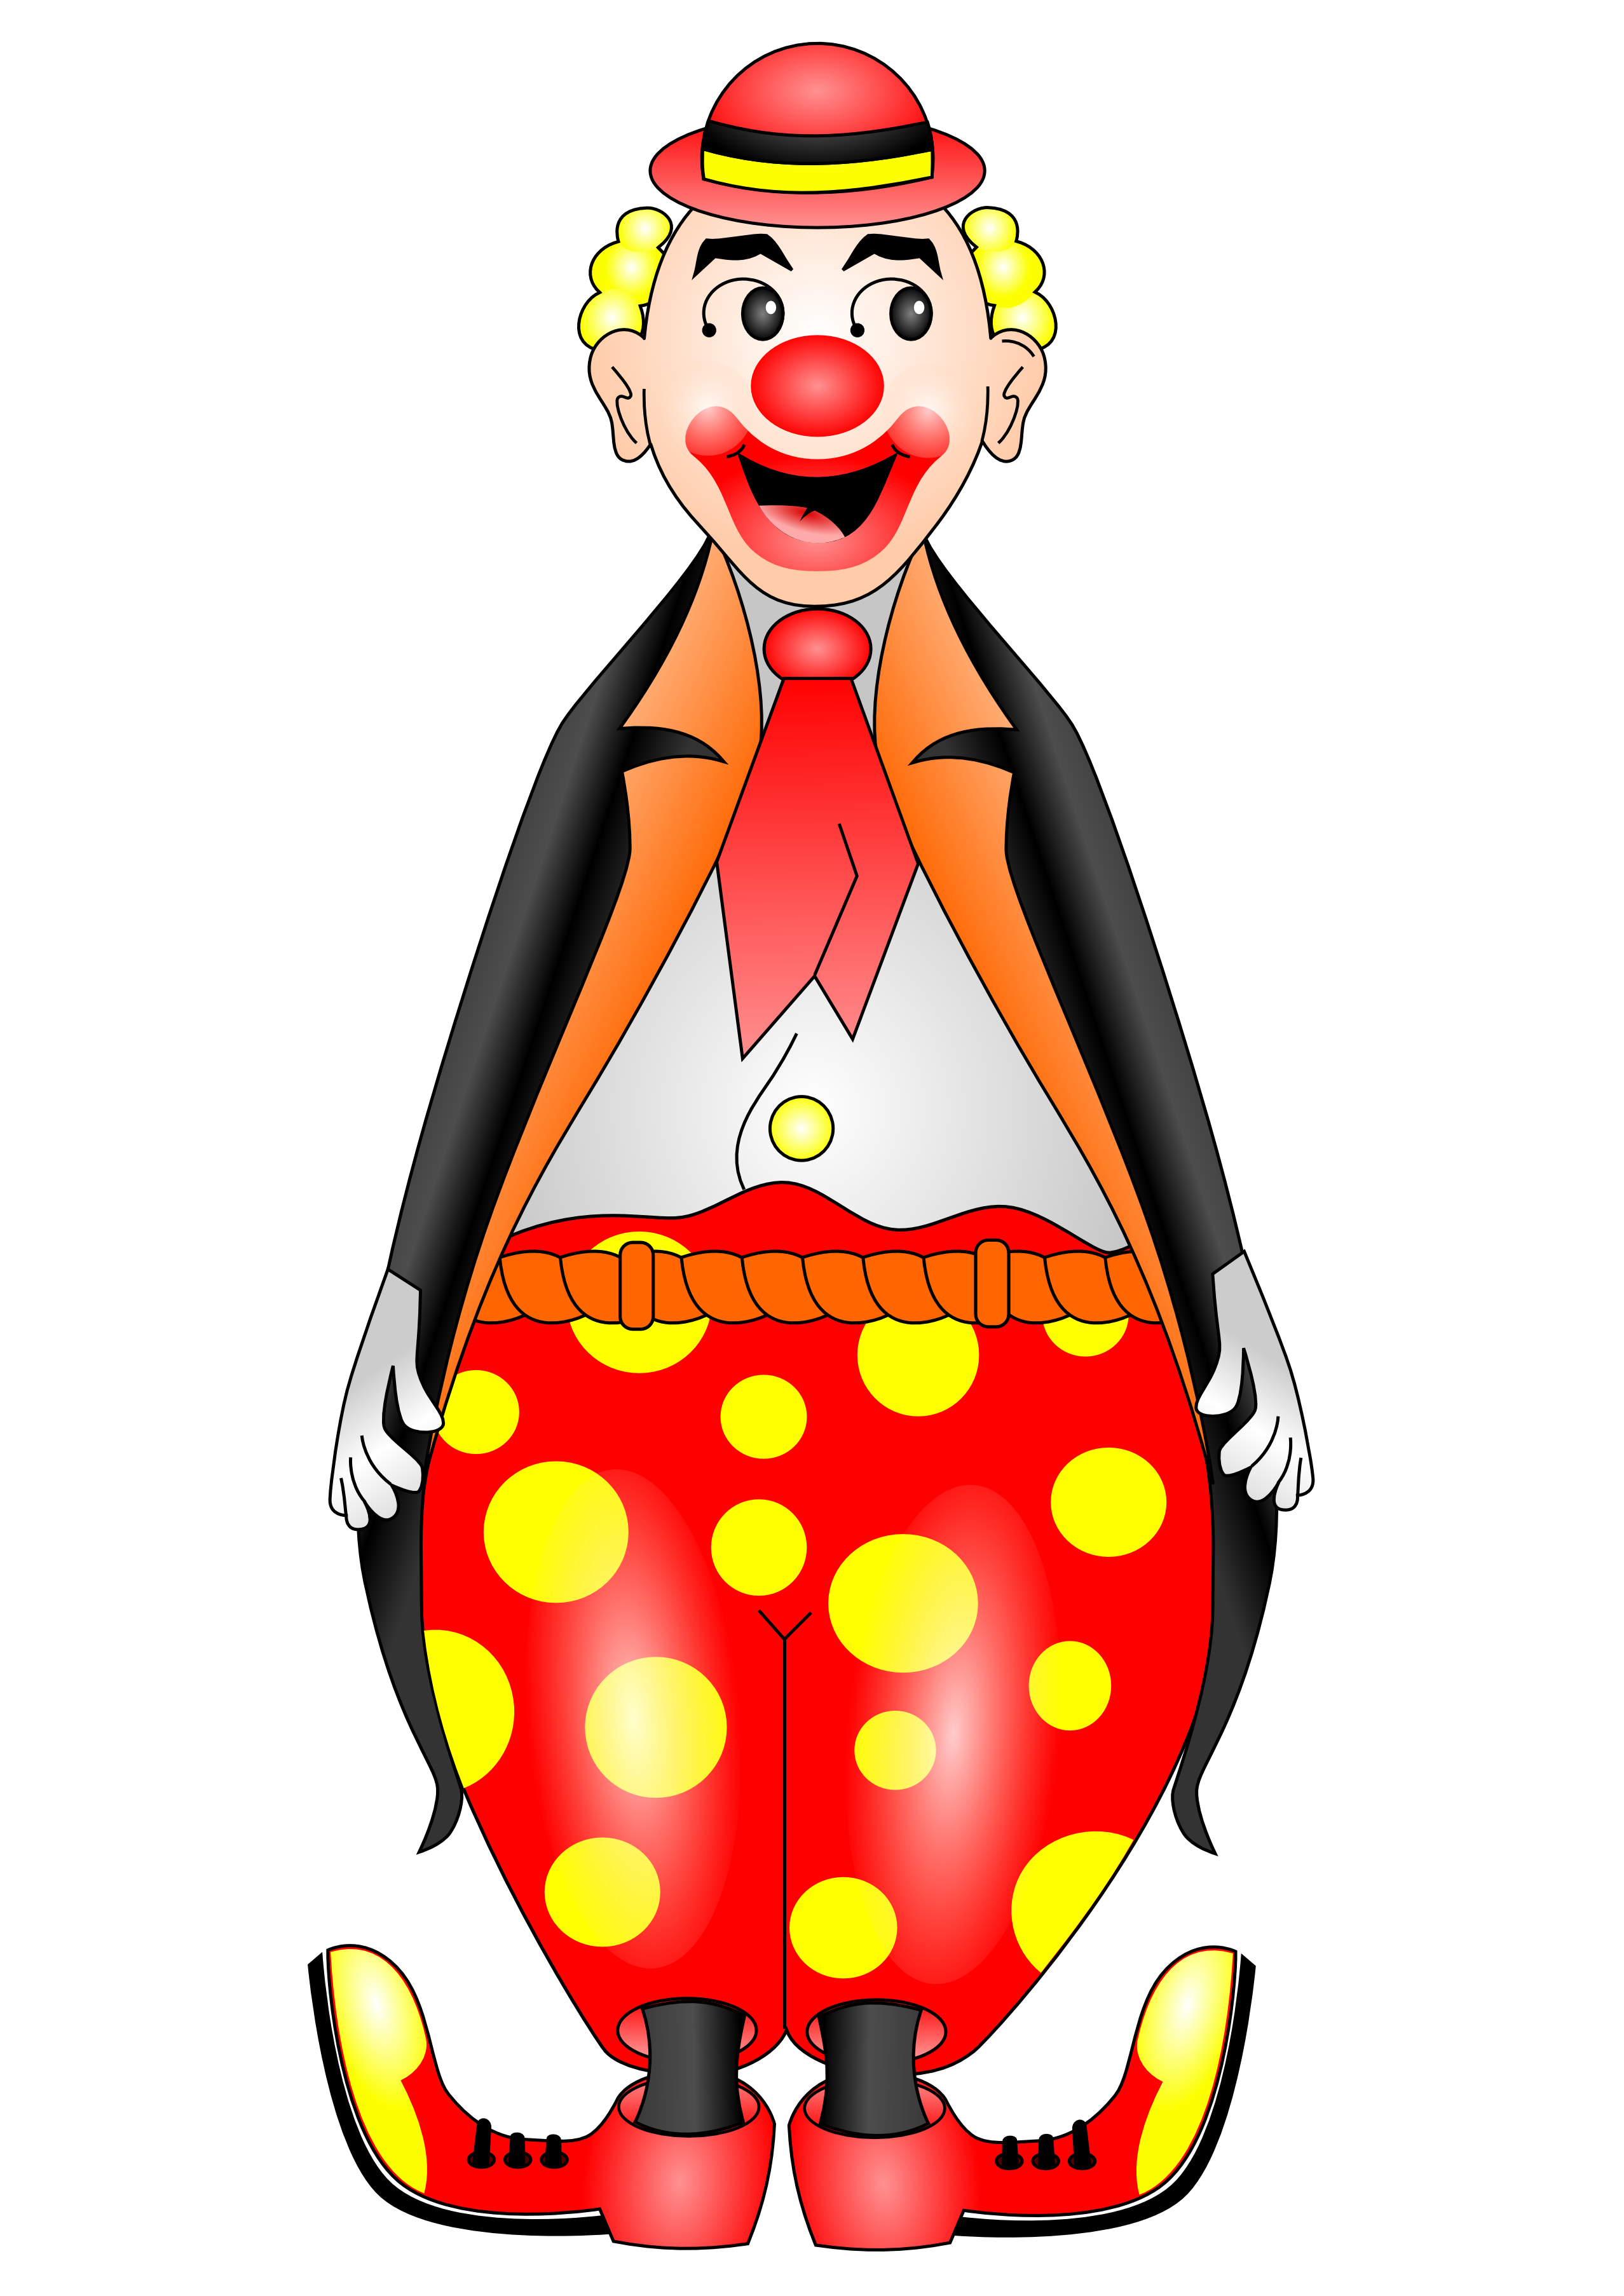 clipart picture of a clown - photo #47